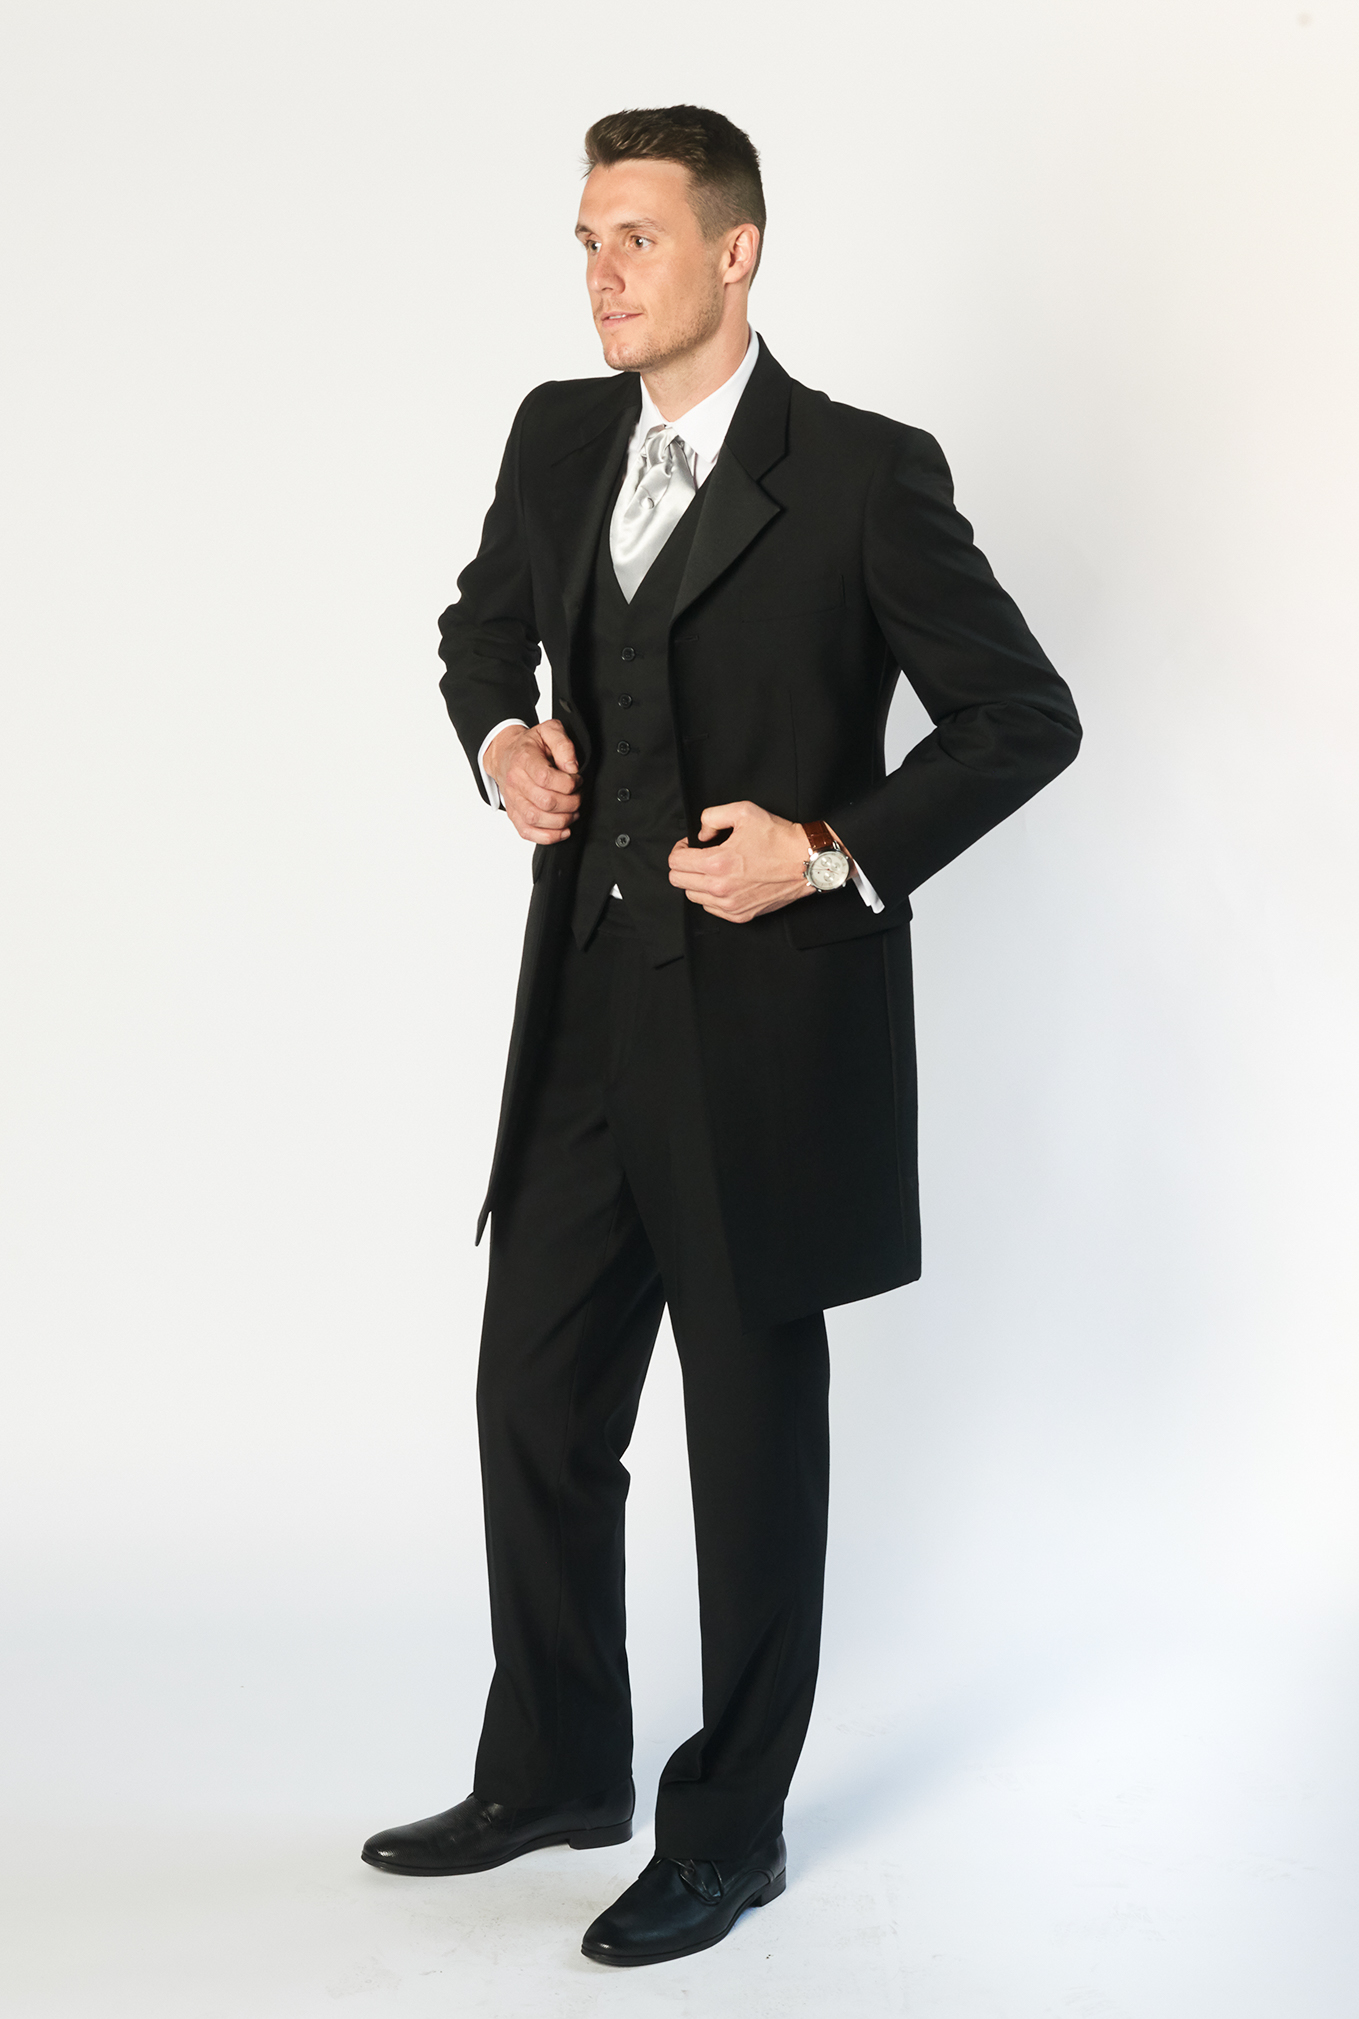 black coat and pants for hire brittons formal wear